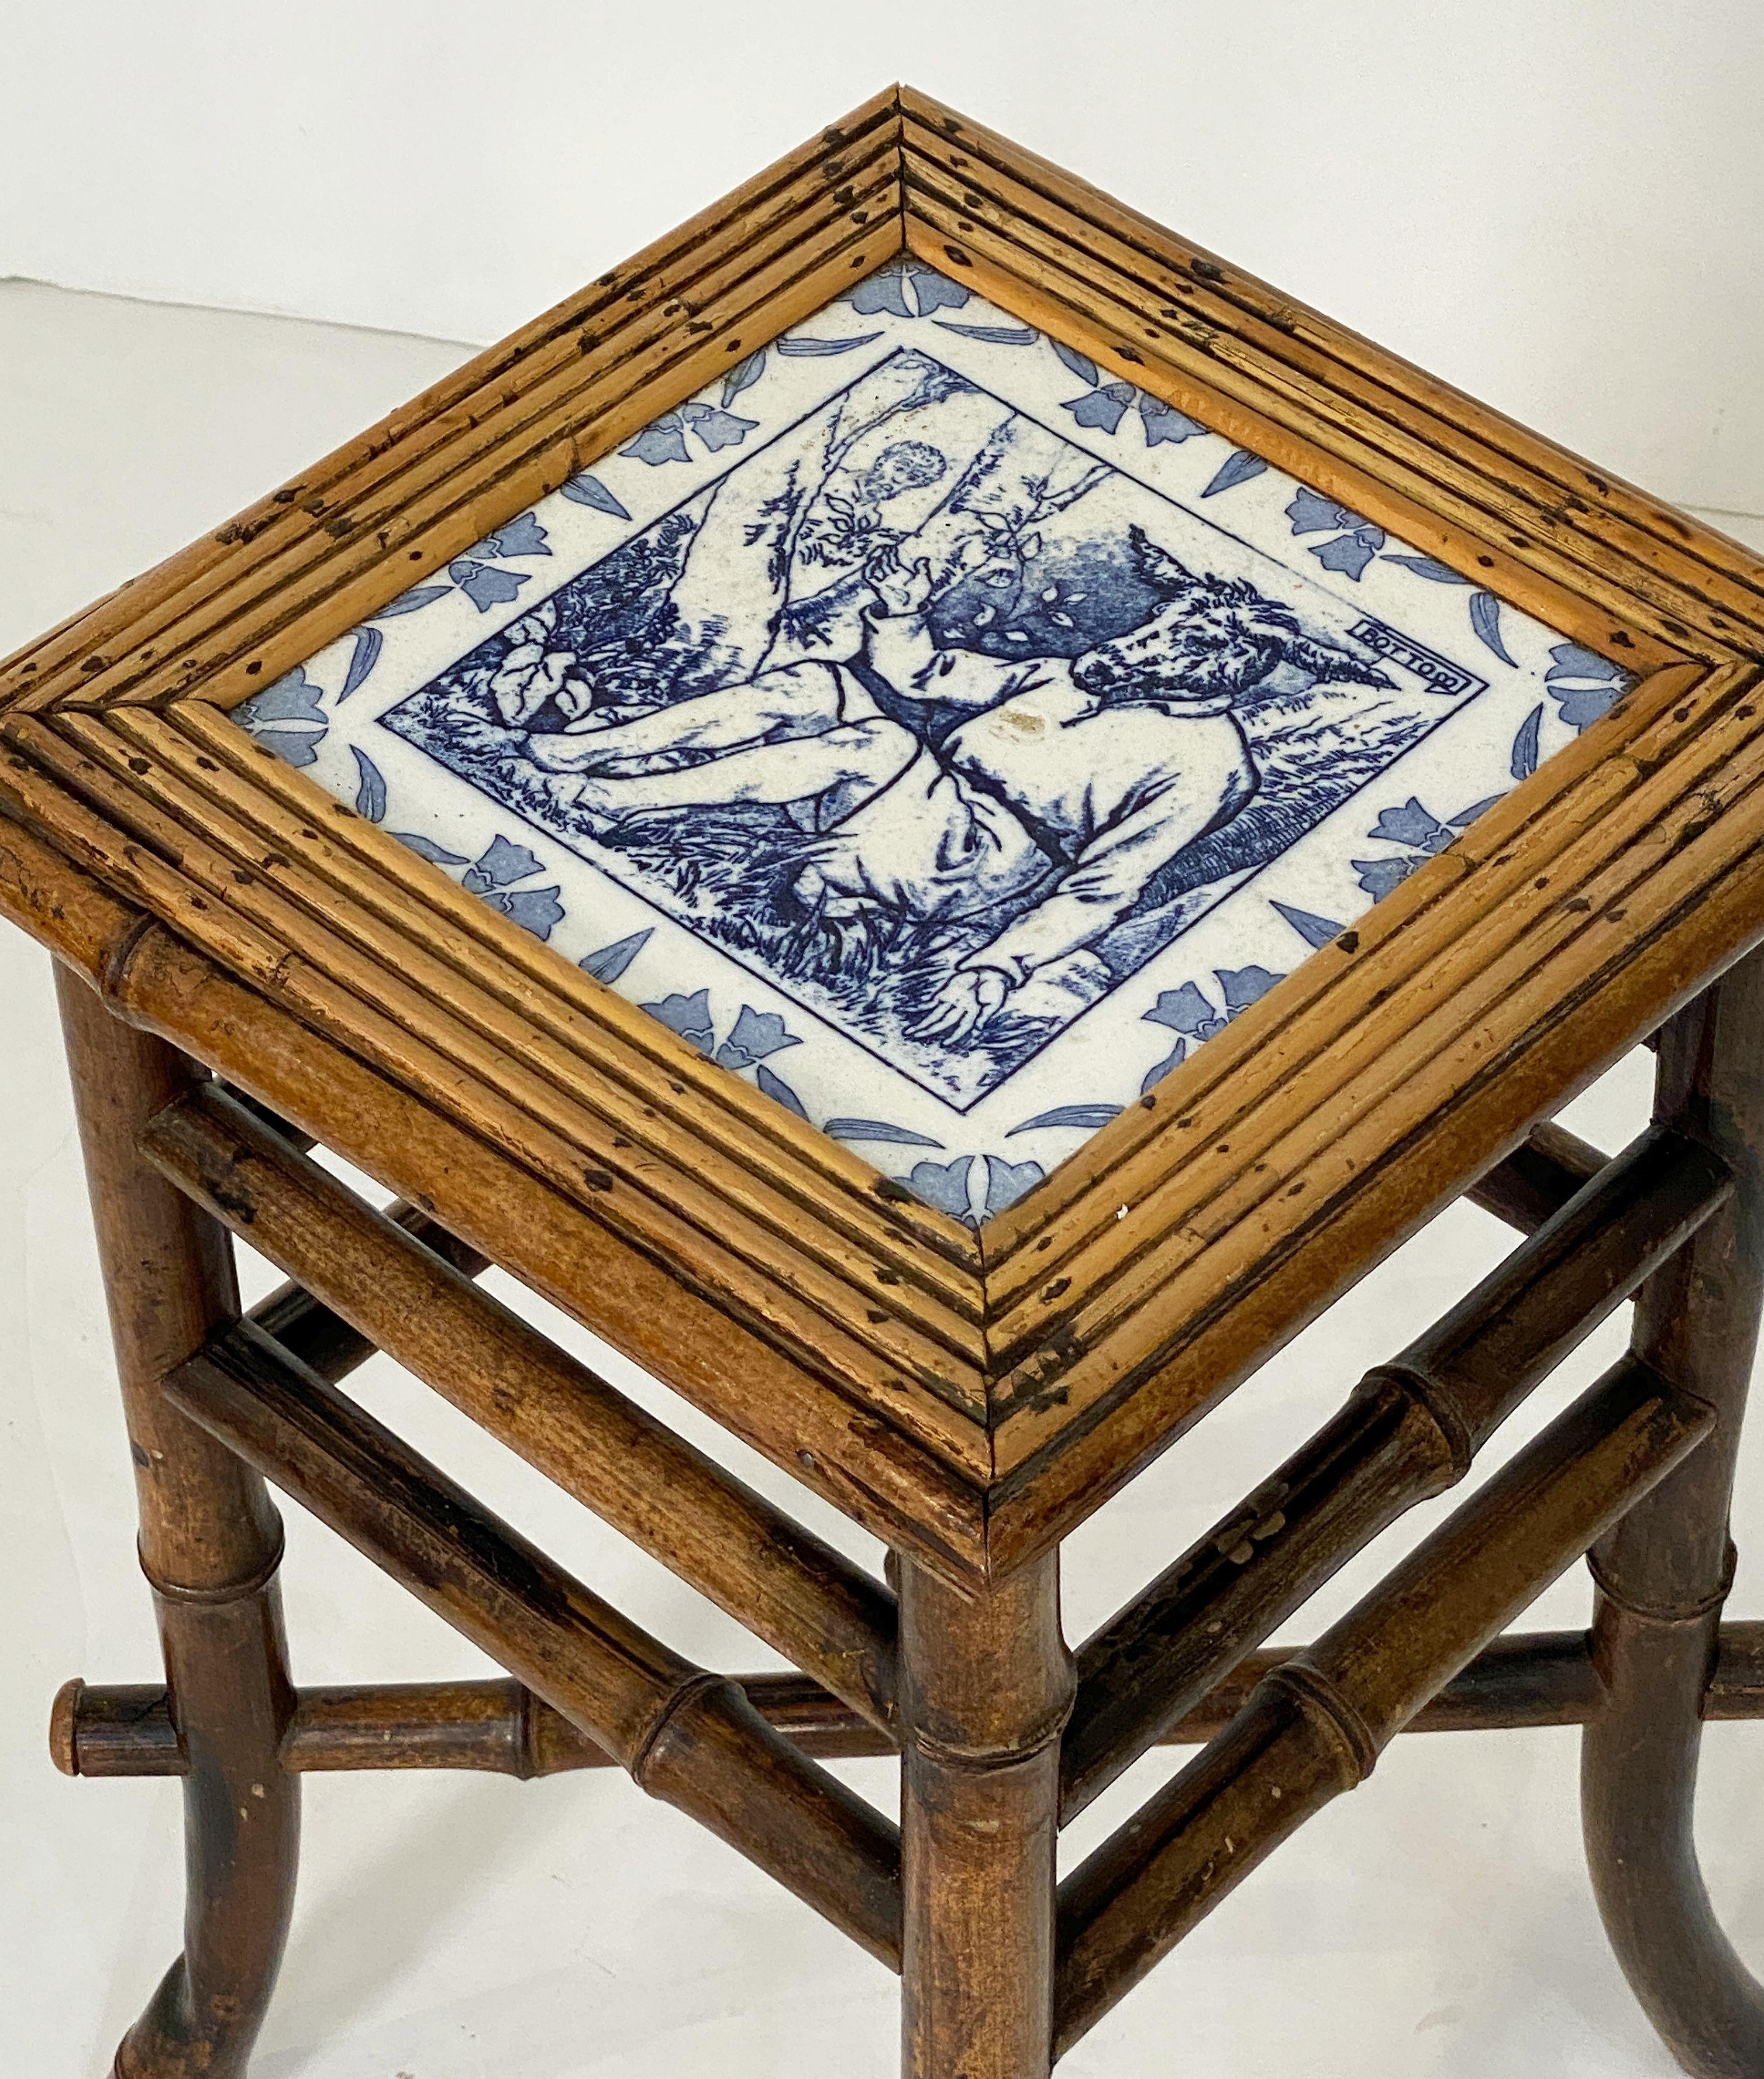 Ceramic English Bamboo Table or Stool with Tile Seat from the Aesthetic Movement Era For Sale